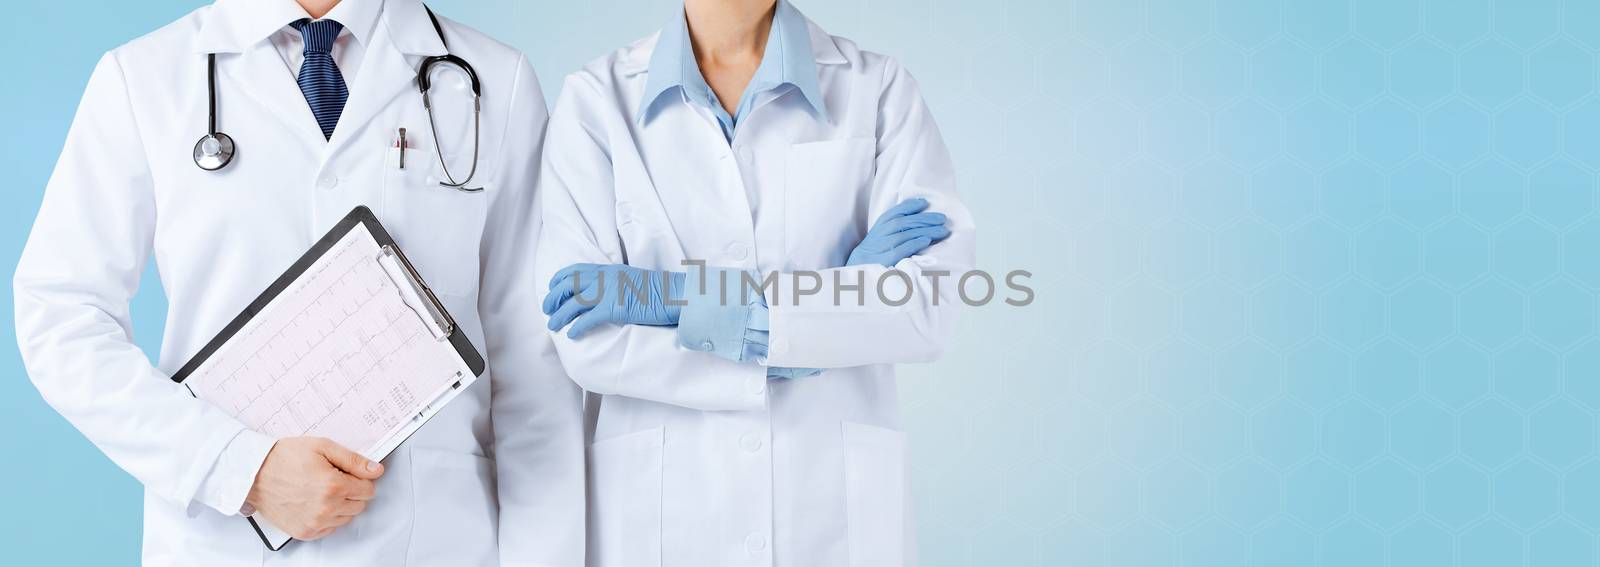 medicine, people, cardiology and health care concept - close up of nurse and male doctor holding cardiogram